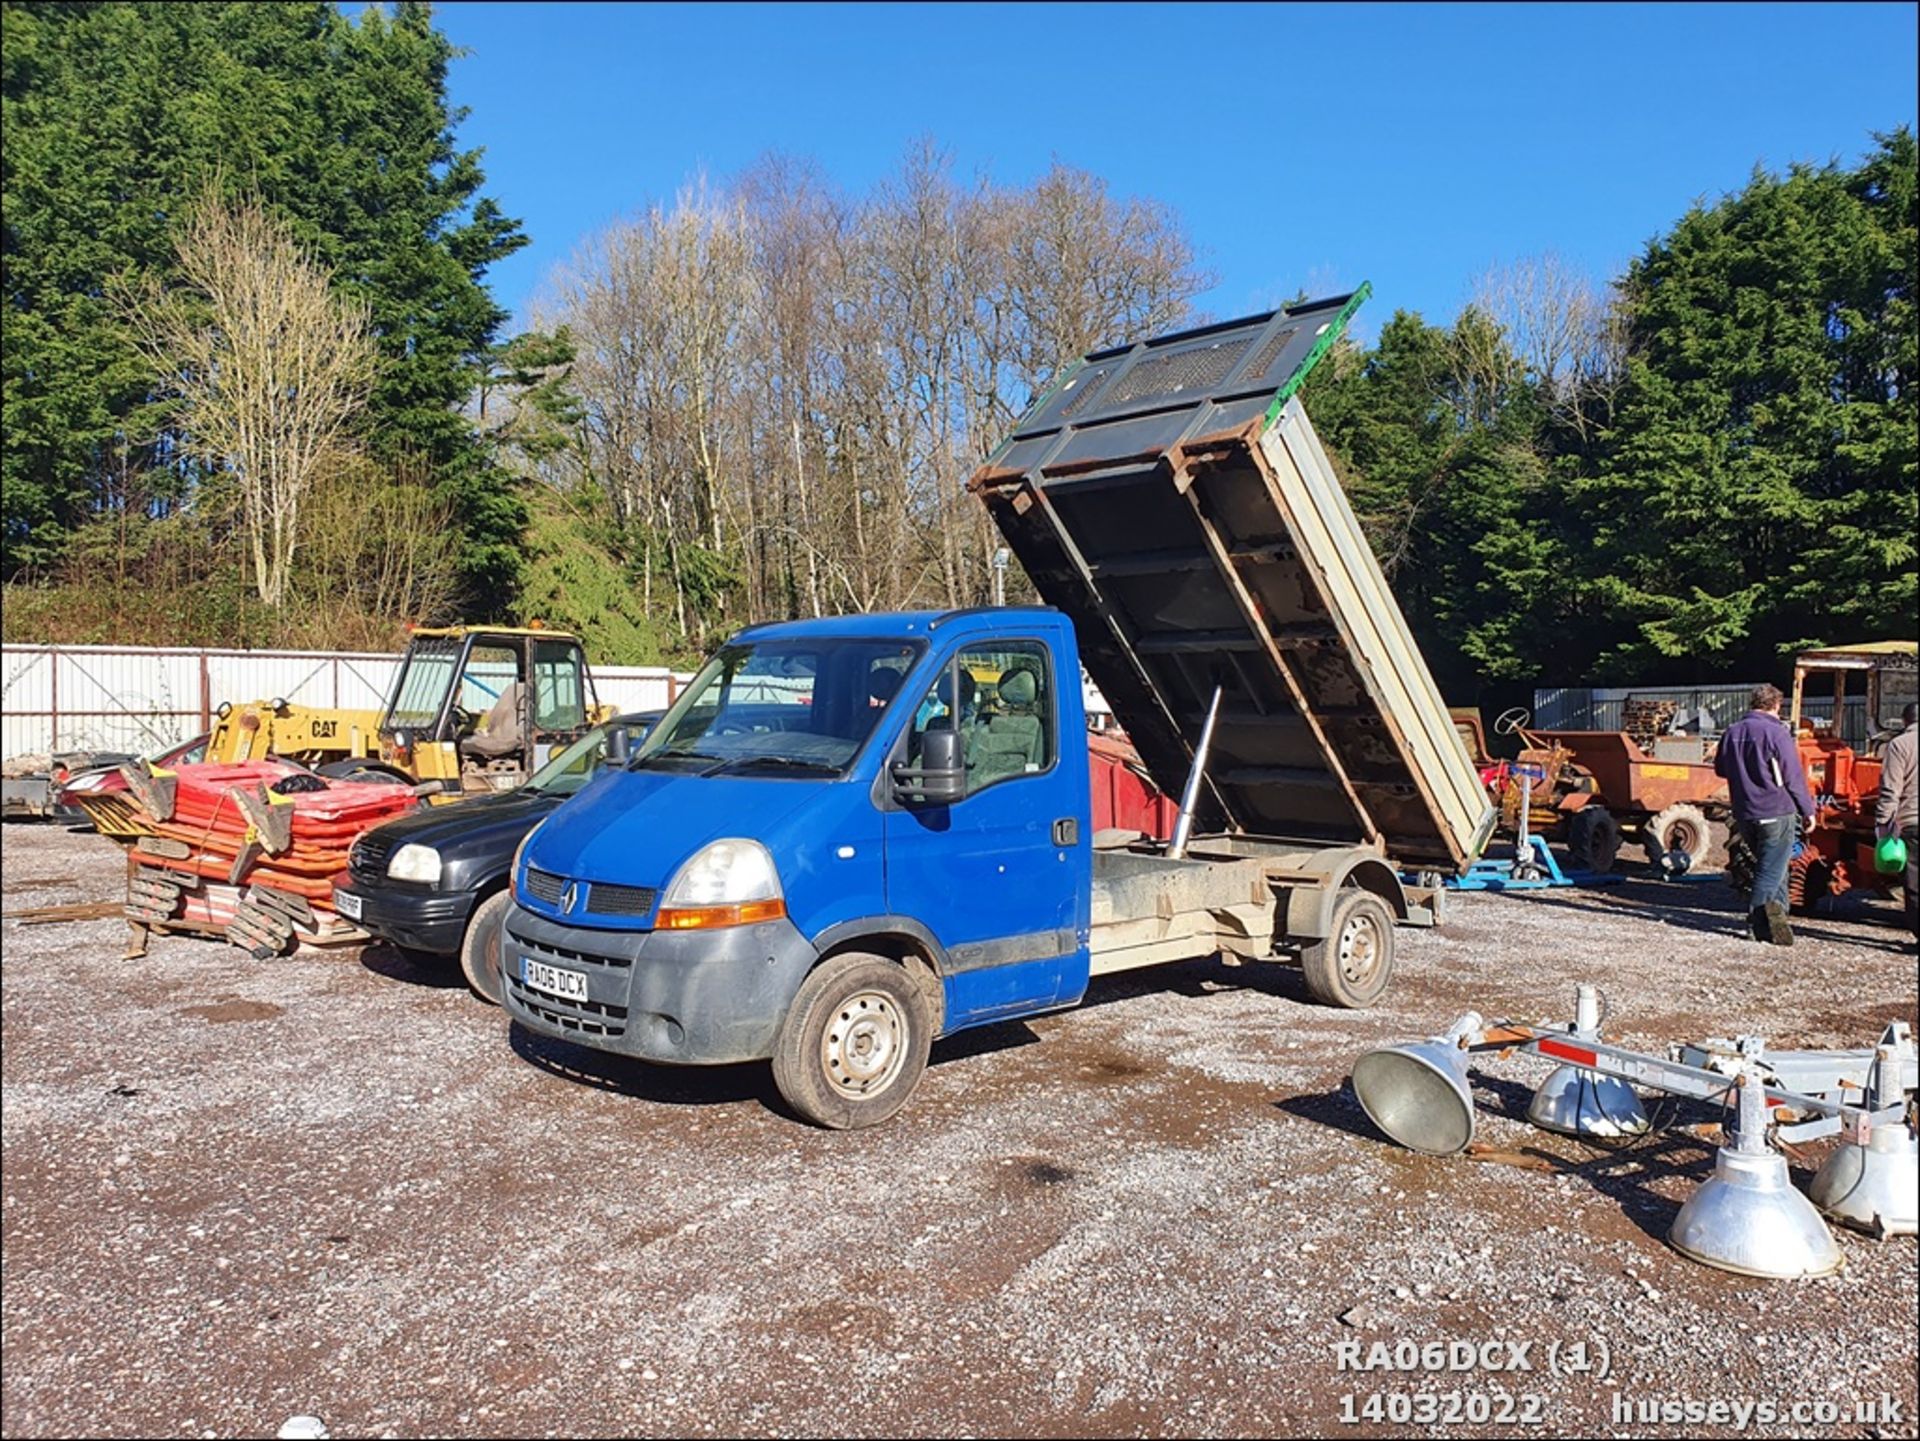 06/06 RENAULT MASTER CCML35 DCI 120 MWB - 2463cc 2dr Tipper (Grey) - Image 2 of 23